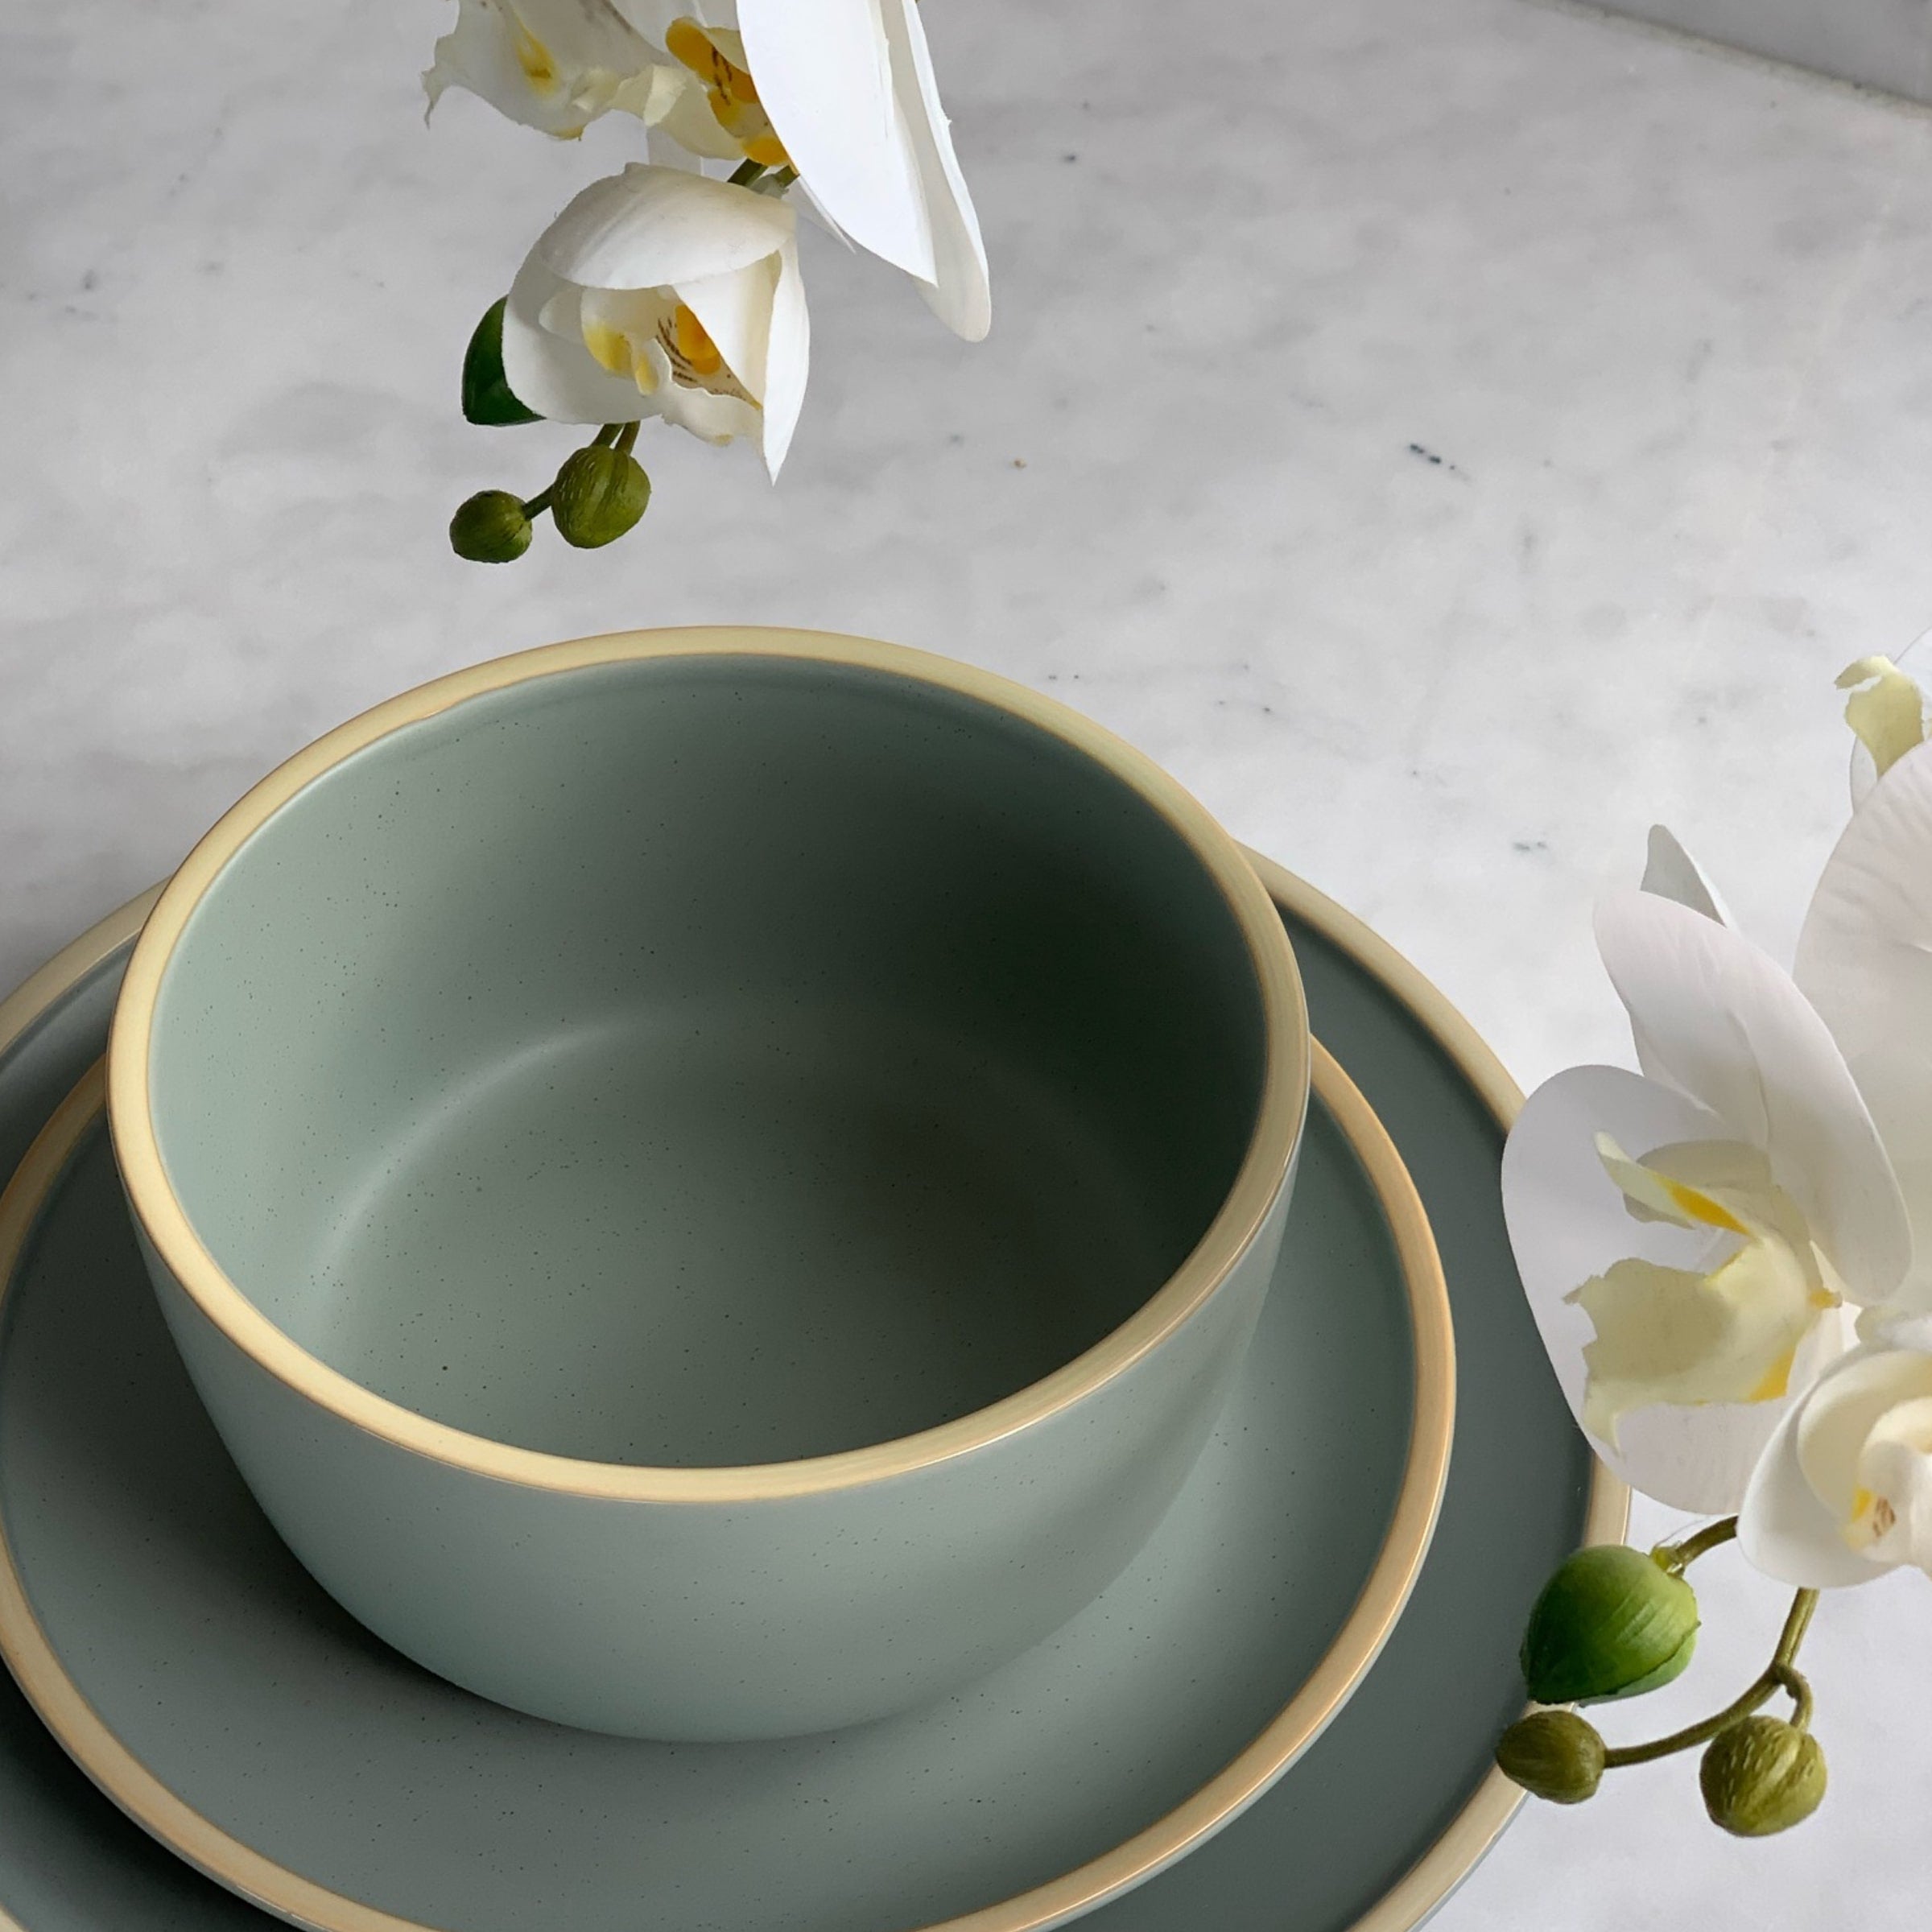 Hall Dinner Bowl - Green - Buy Bowls Online at FRANKY'S